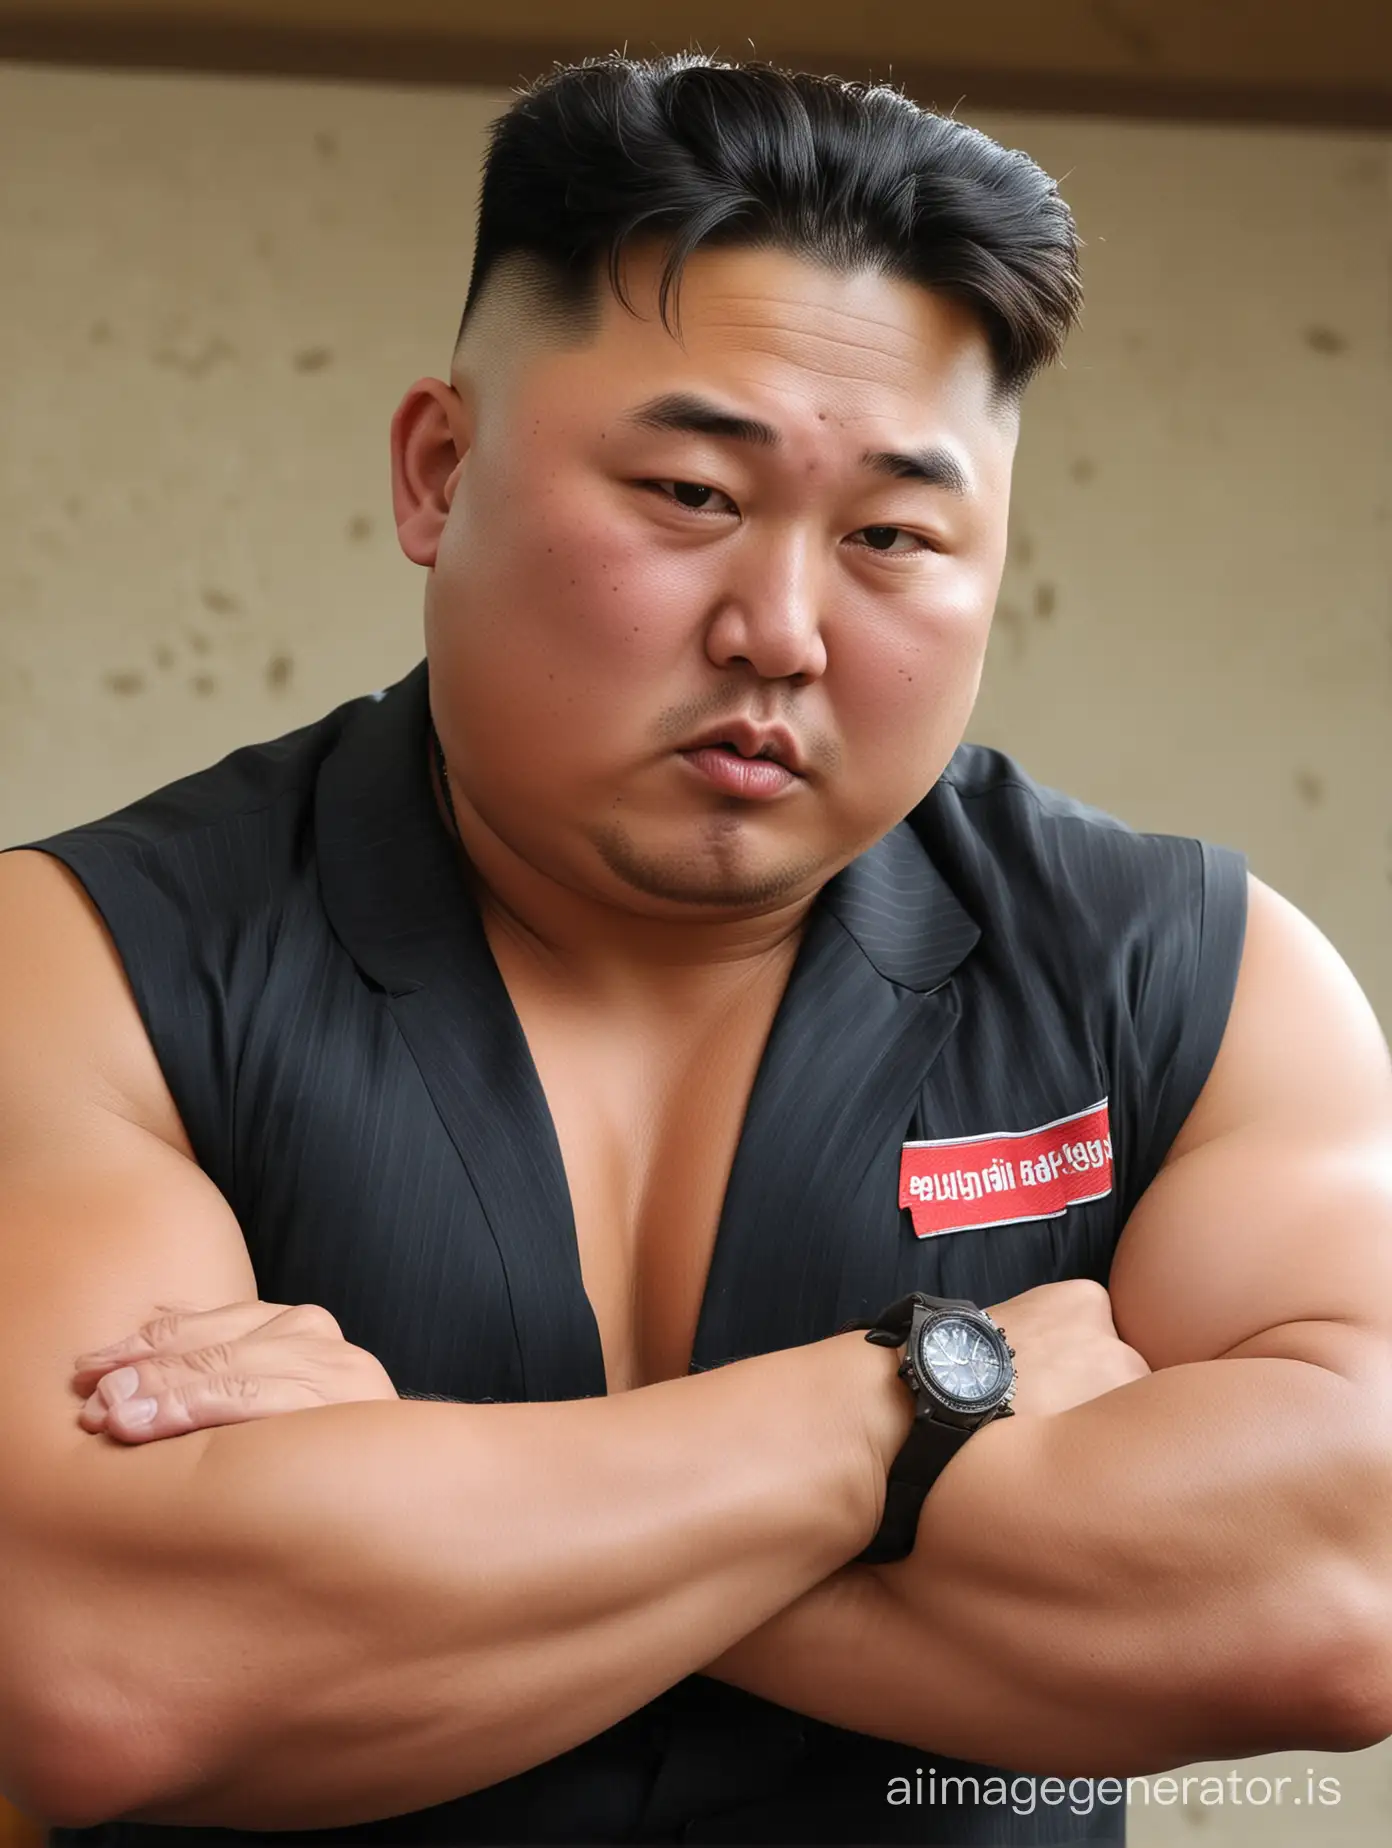 Kim Jong Un as a bodybuilder looking down at his watch